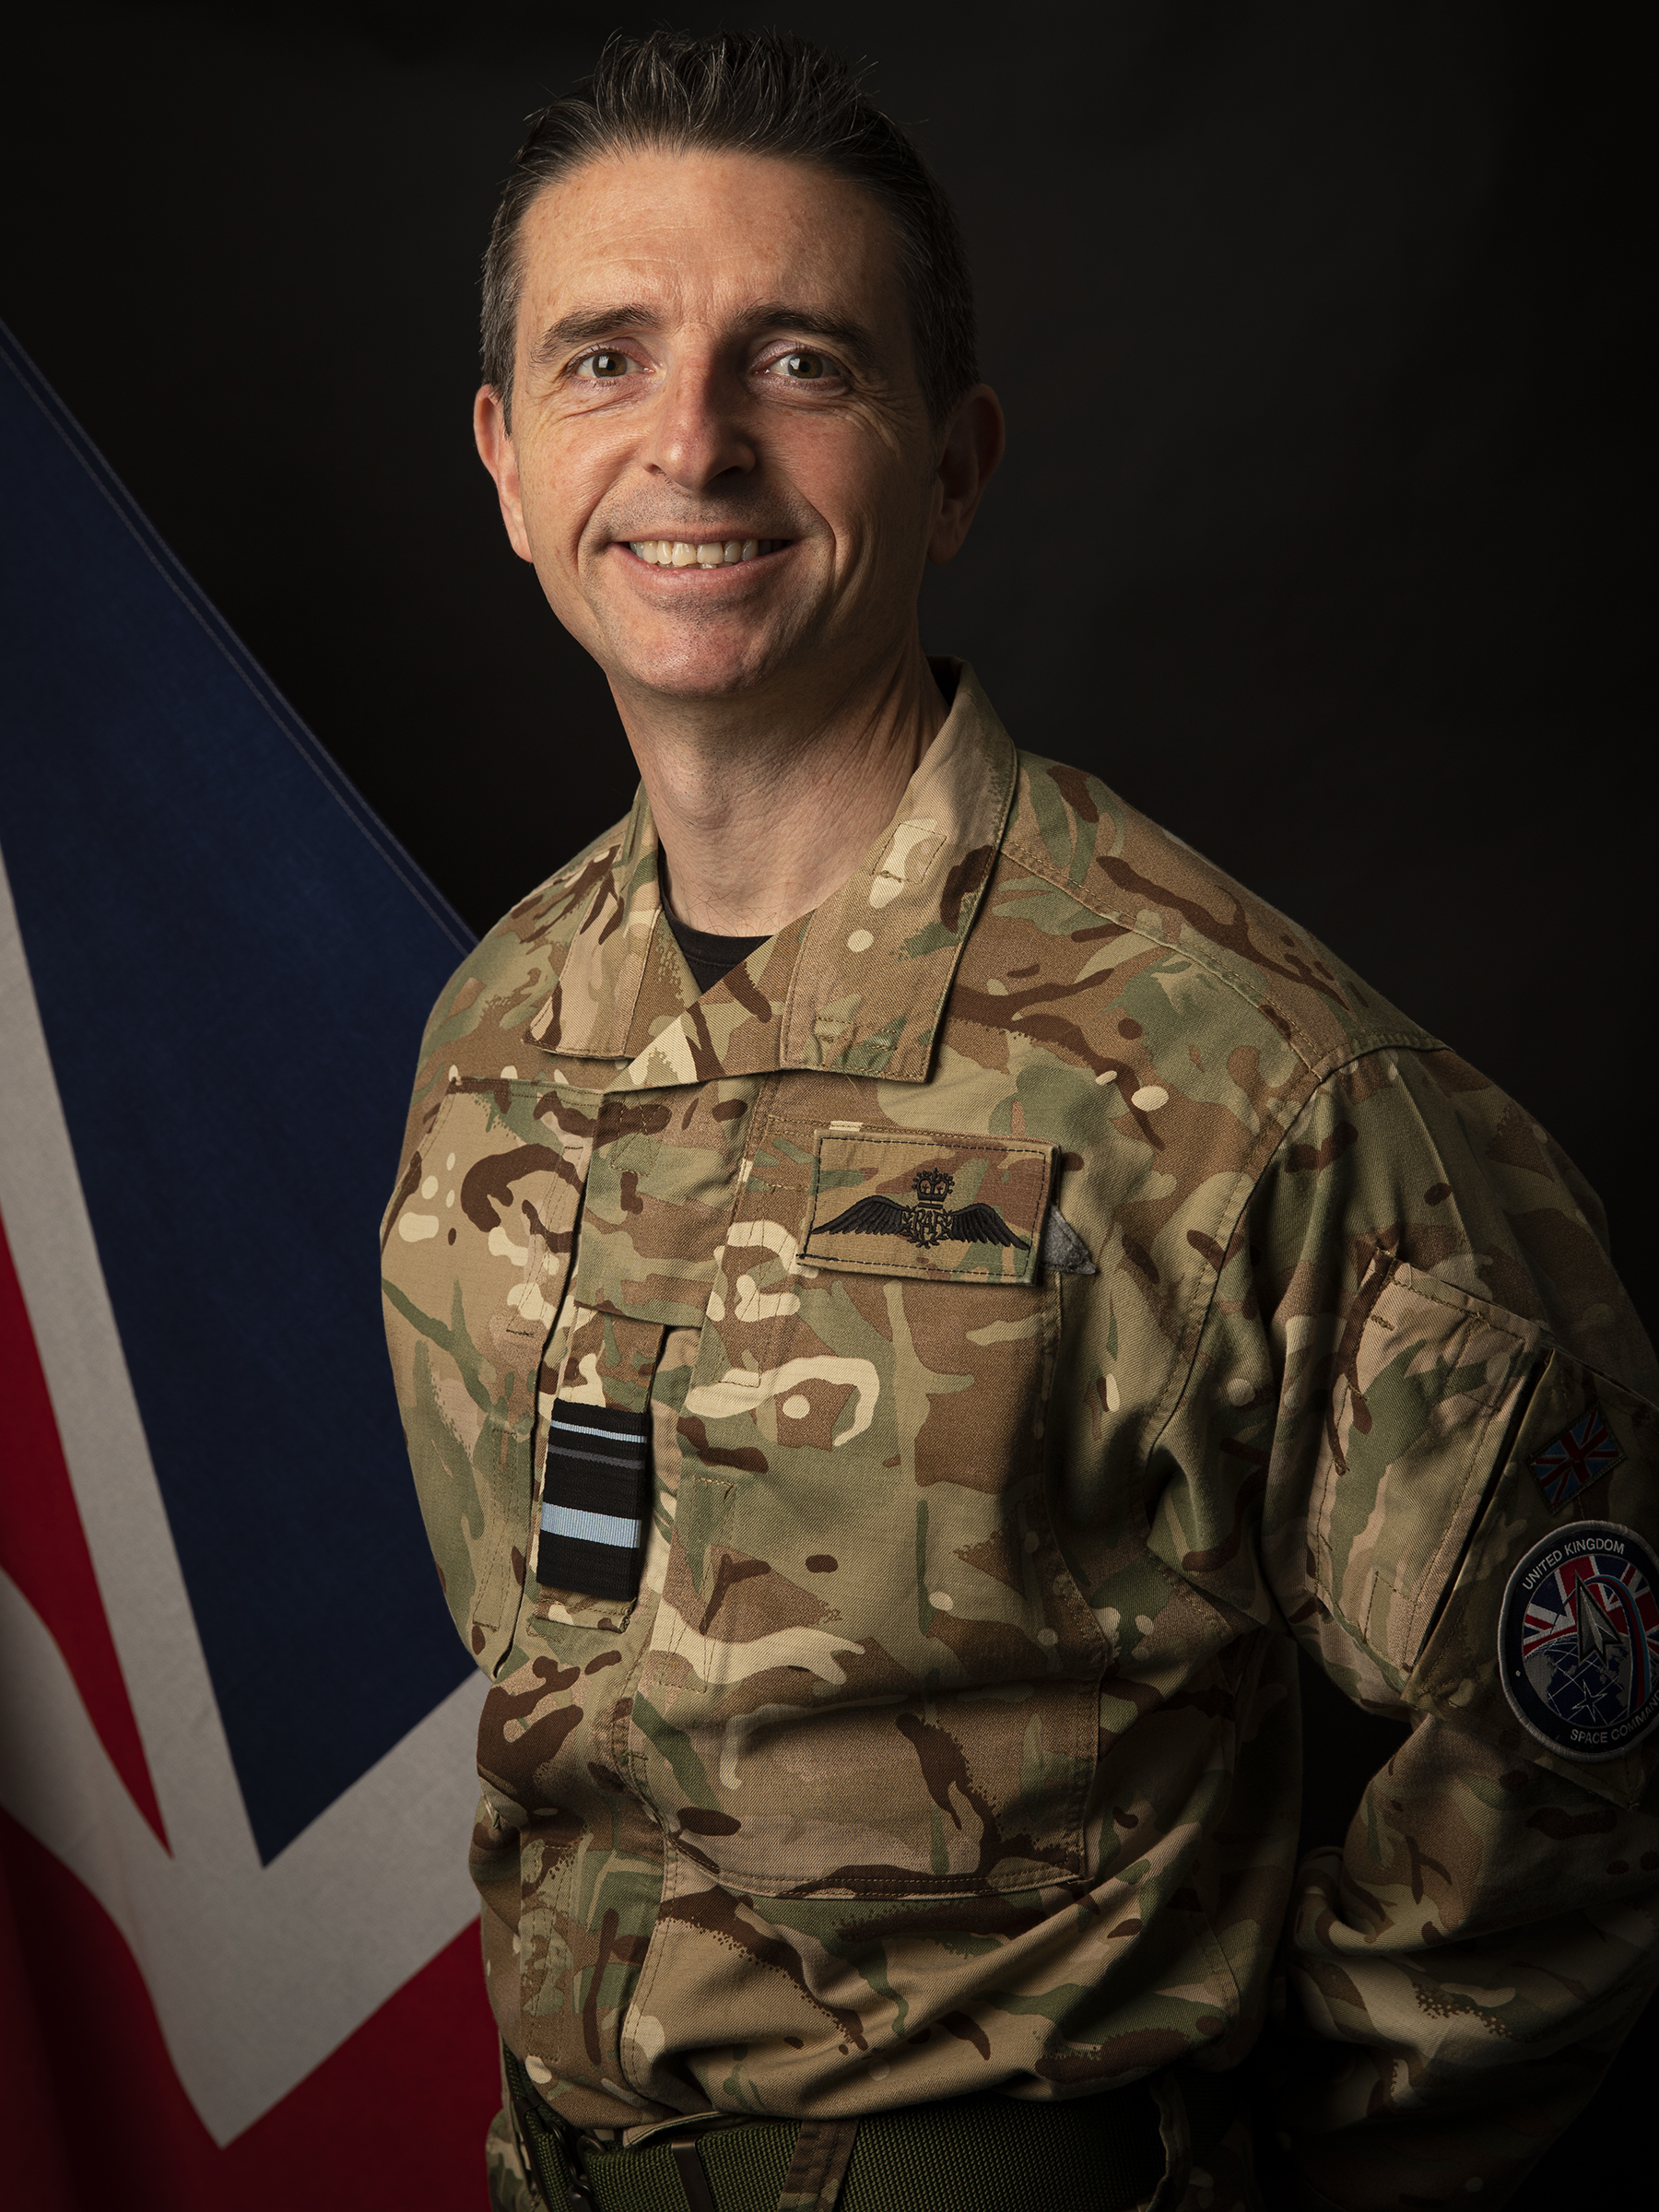 Image shows Air Commodore Paul Godfrey.